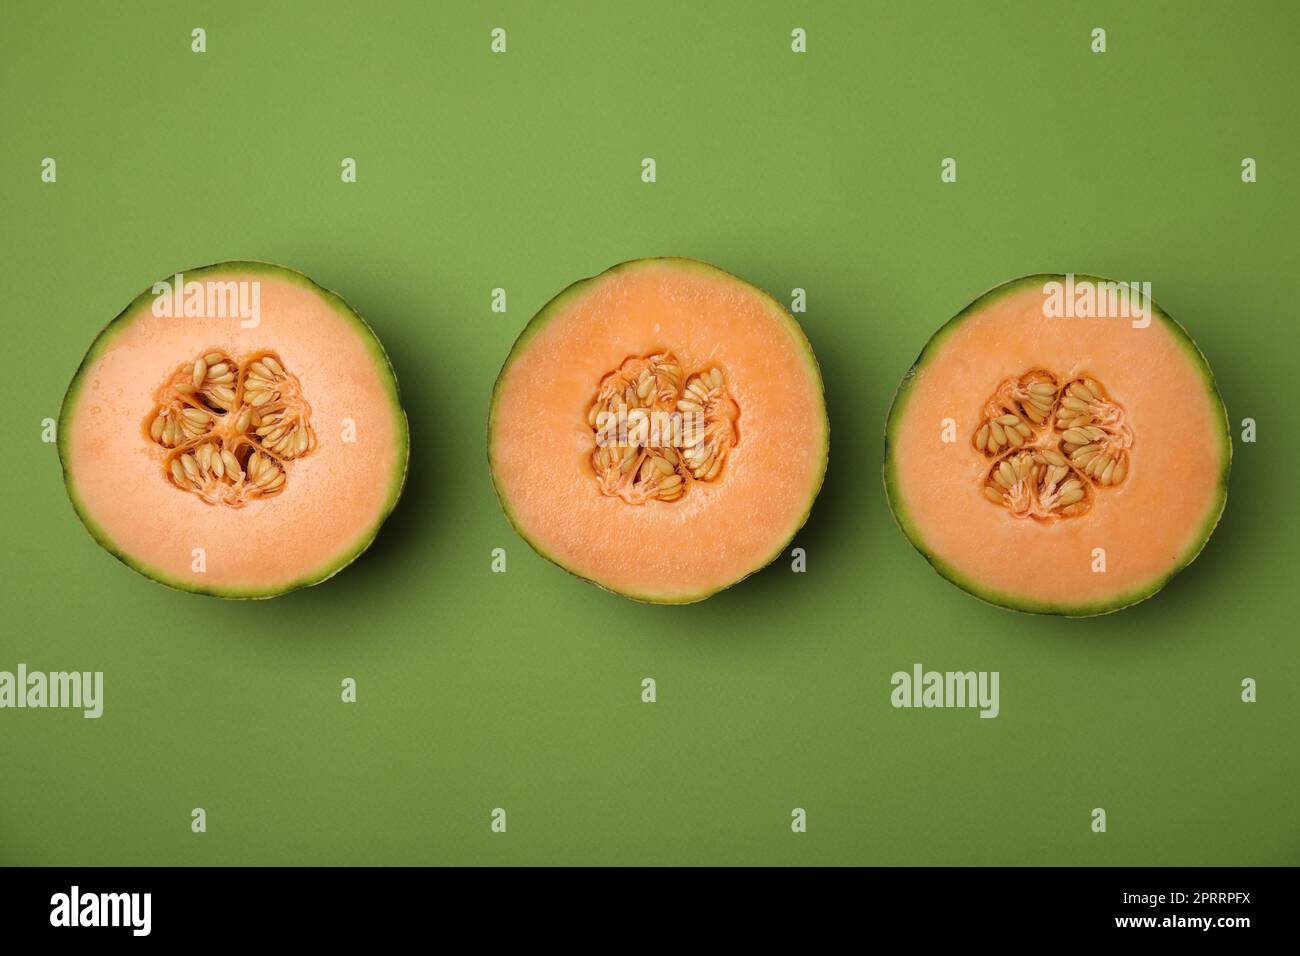 Cut melons on green background, flat lay Stock Photo